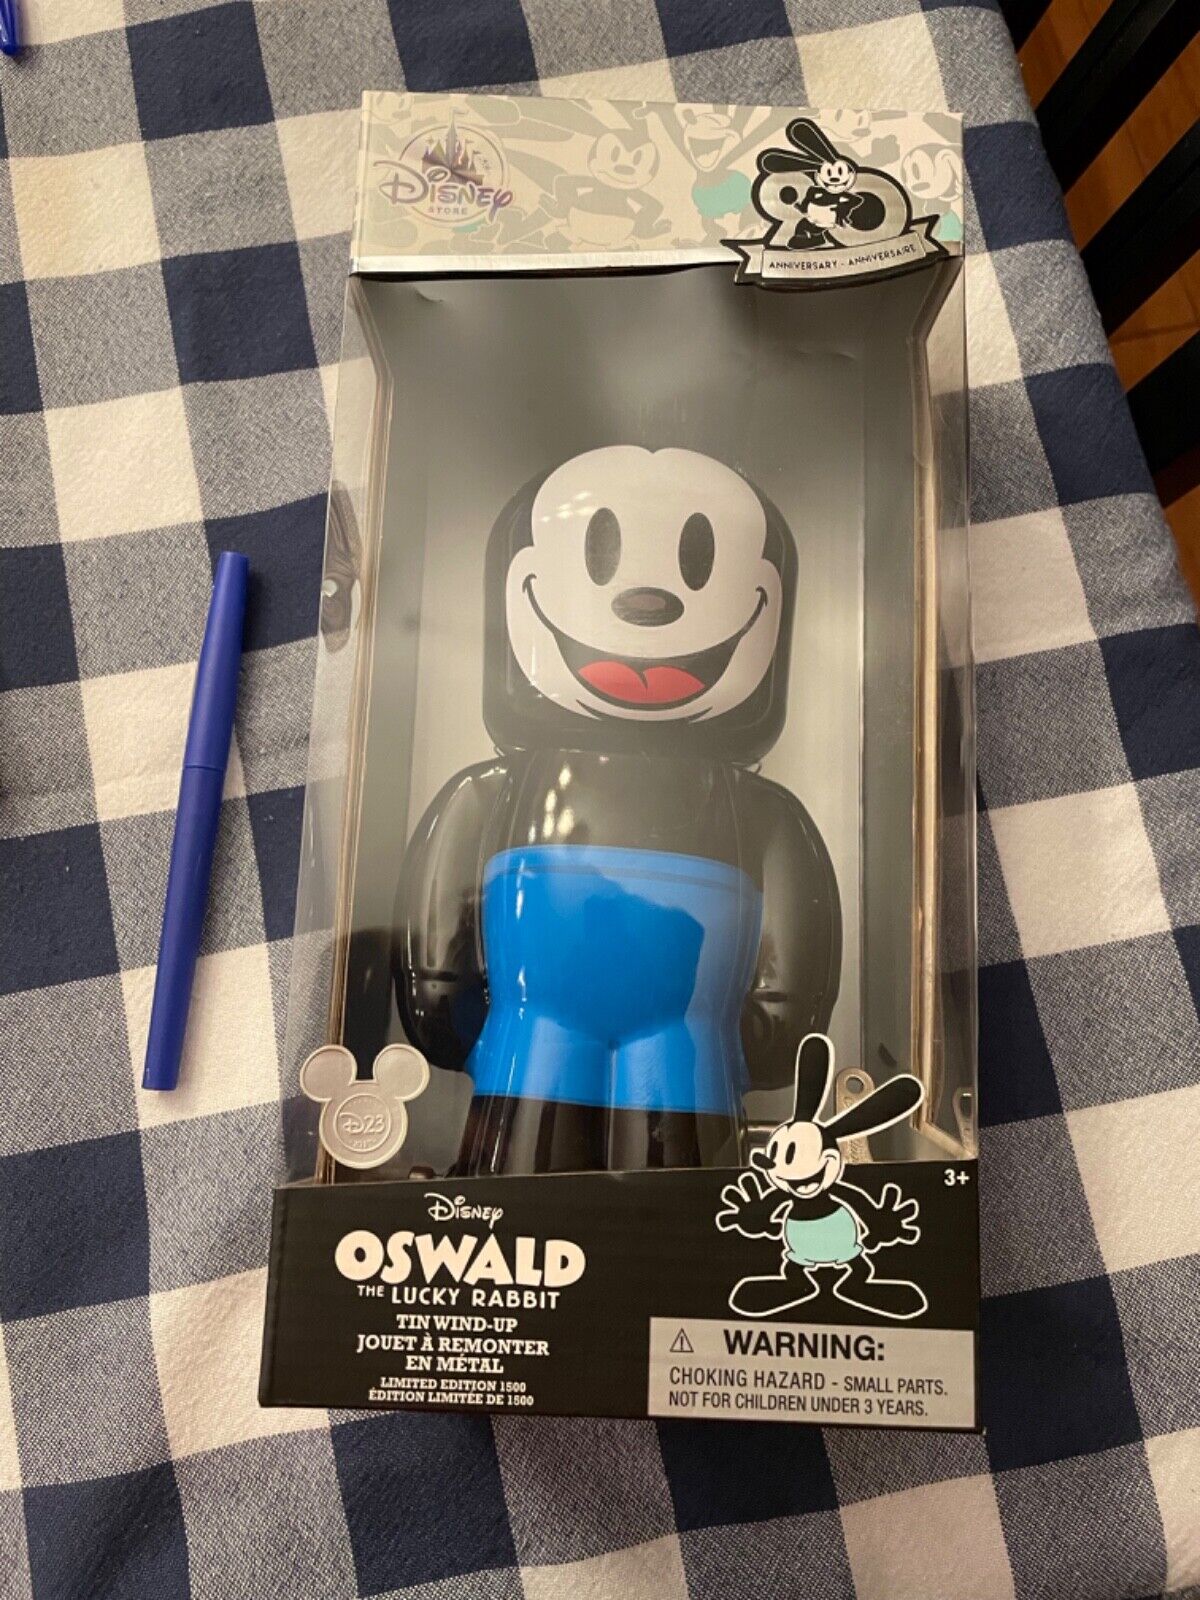 Disney Oswald The Lucky Rabbit Tin Wind Up Toy D23 Expo 2017 LE 1500 Schylling